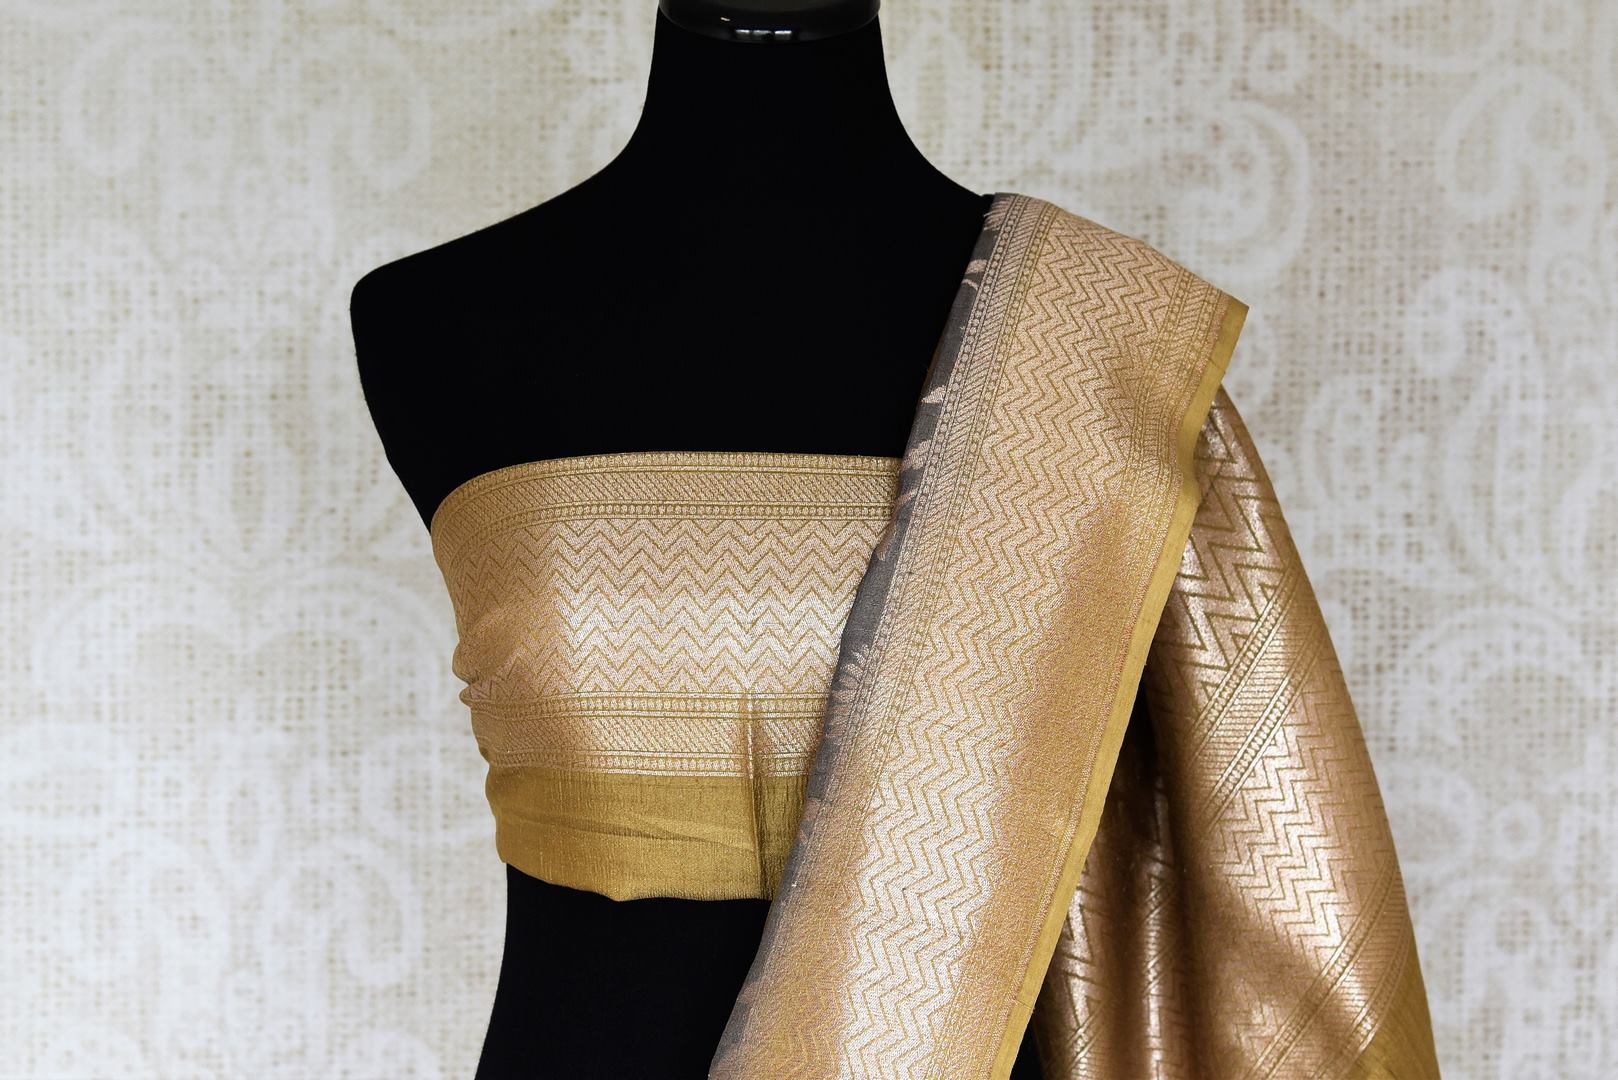 Buy grey khaddi Banarasi sari online in USA with minakari zari floral work. Feel traditional on special occasions in beautiful Indian designer sarees from Pure Elegance Indian fashion store in USA. Choose from a splendid variety of Banarasi sarees, pure handwoven saris. Buy online.-blouse pallu